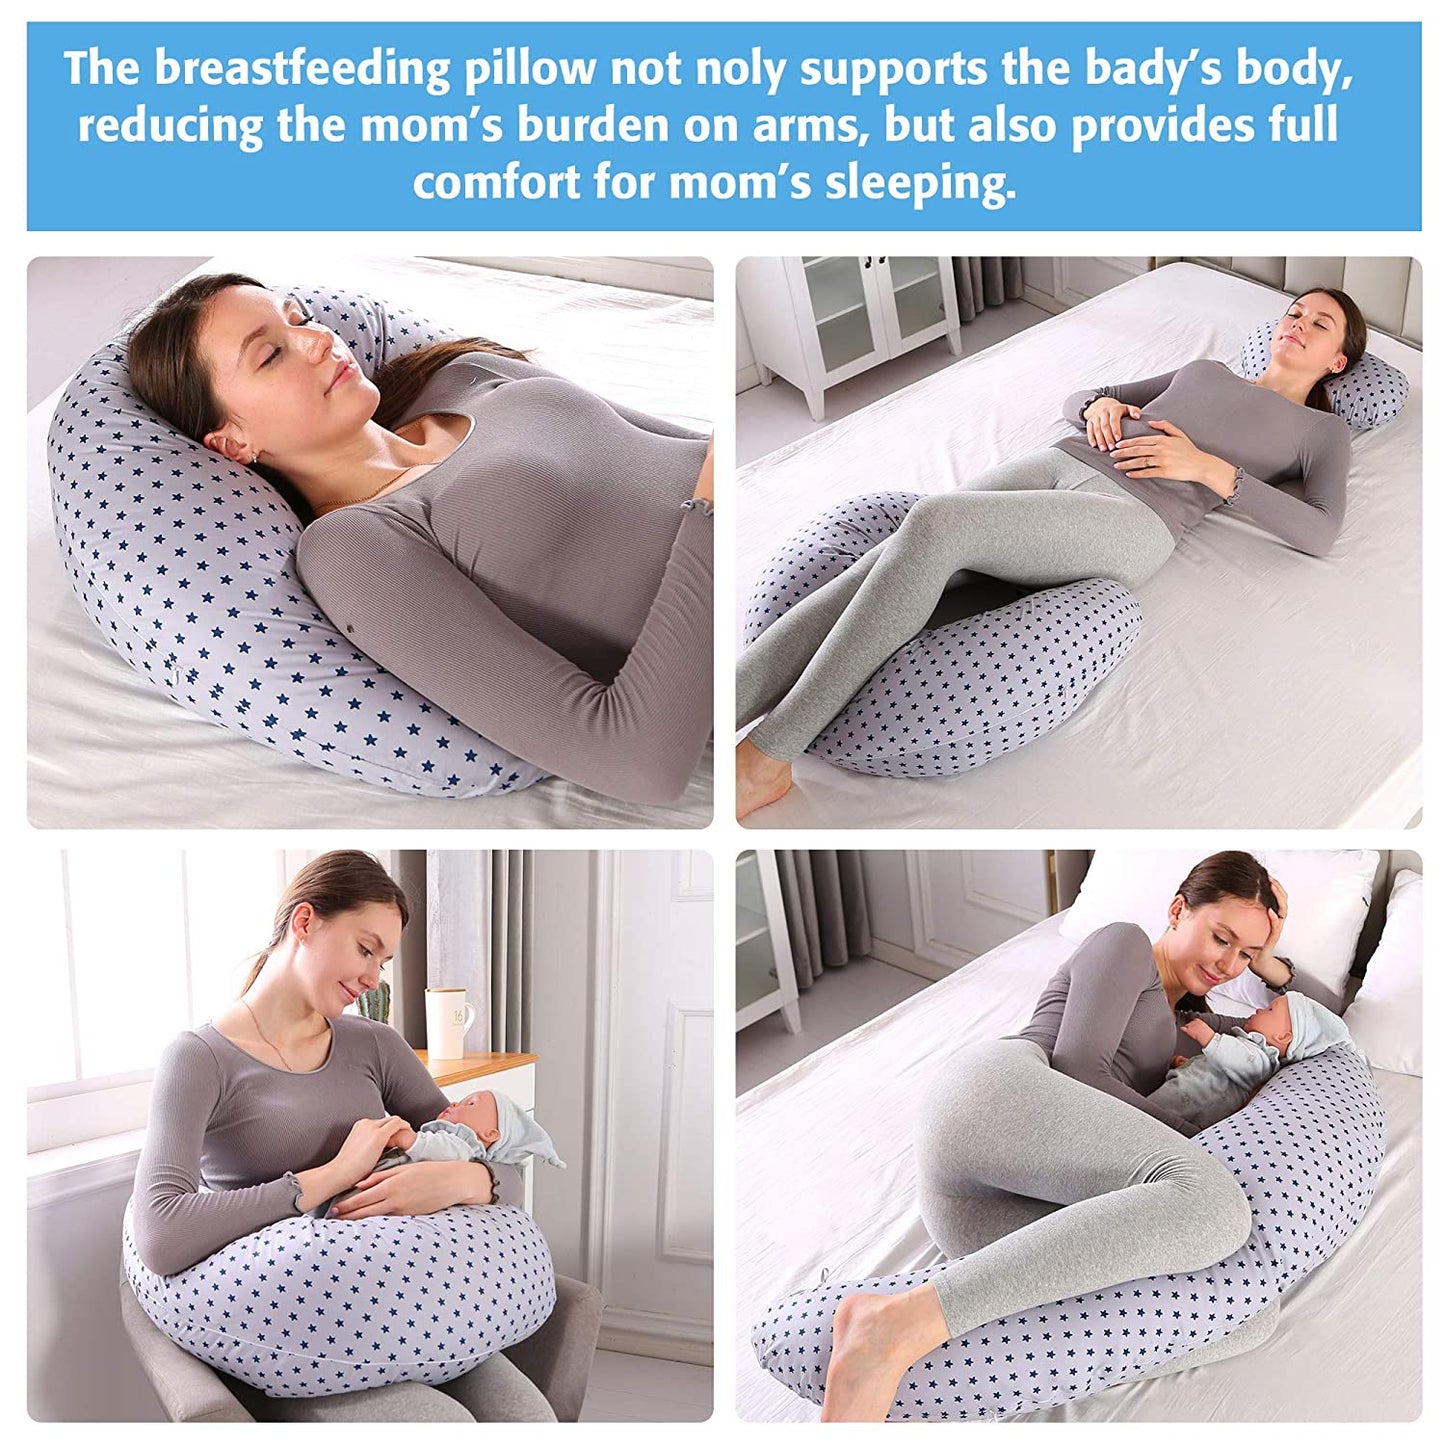 Chilling Home 2 in 1 Nursing Pillows for Breastfeeding & Pregnancy Pillows